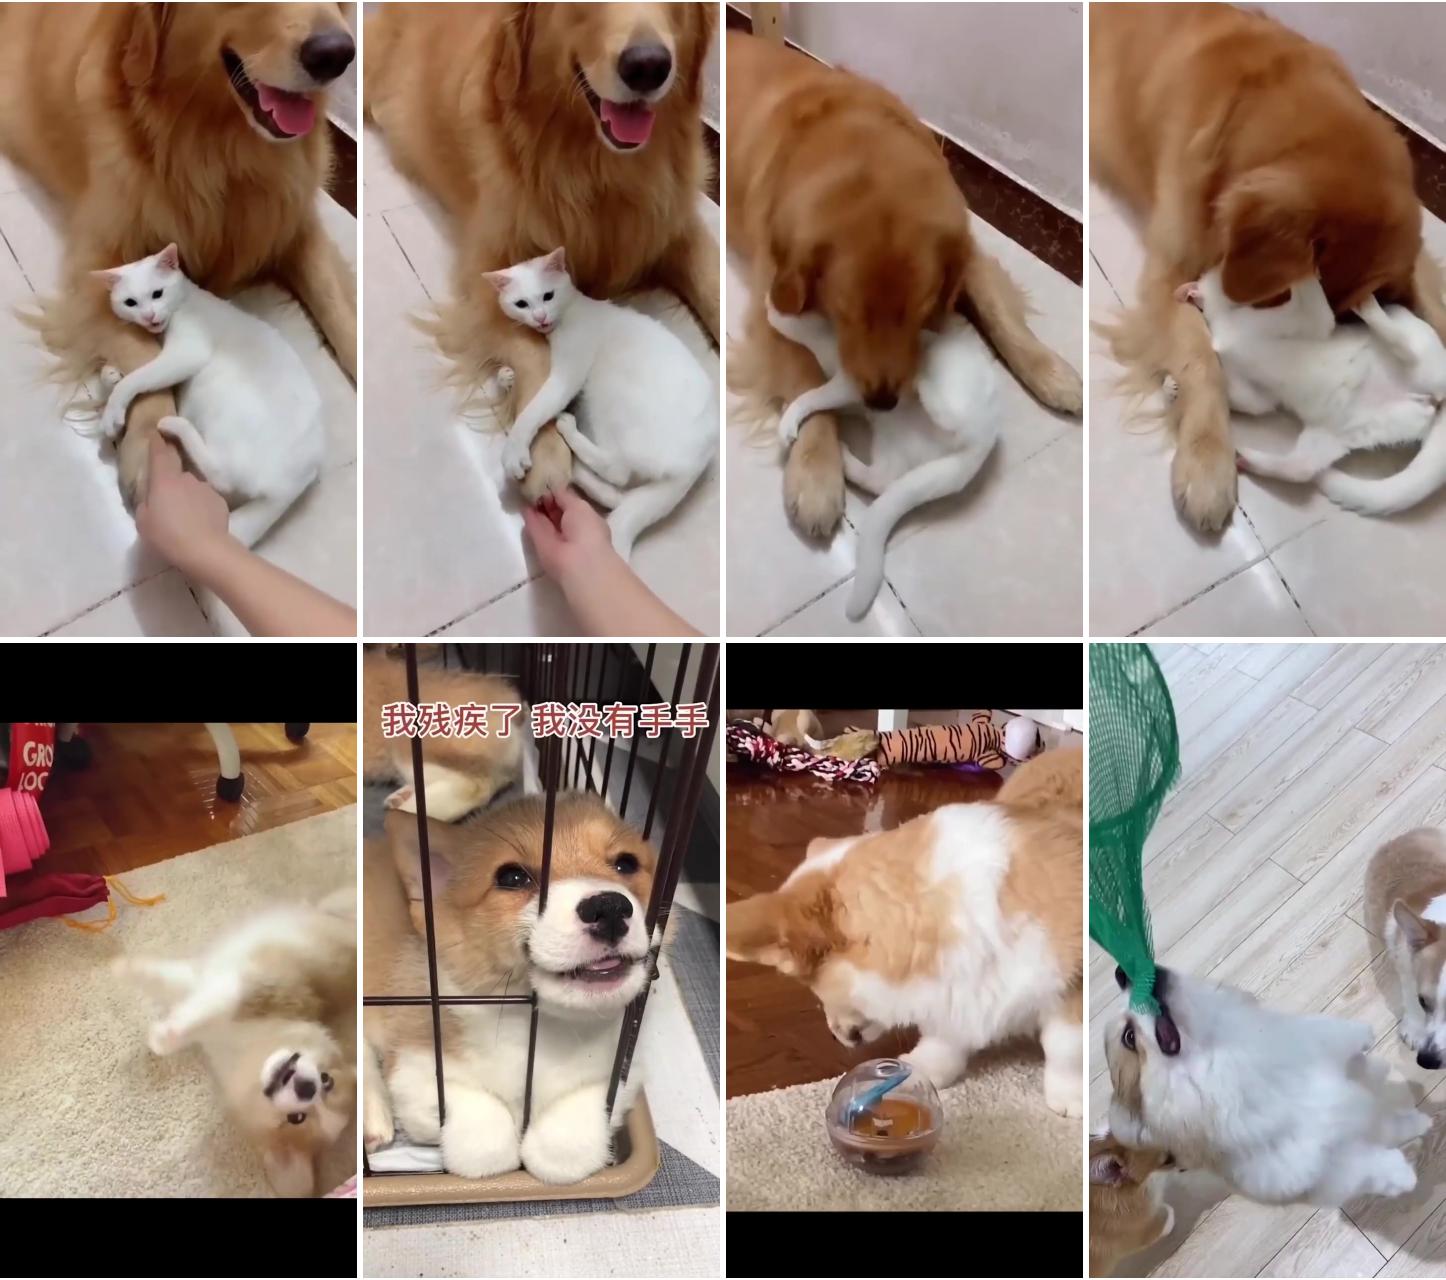 13 things about halarious cat you may not have known; cute dogs